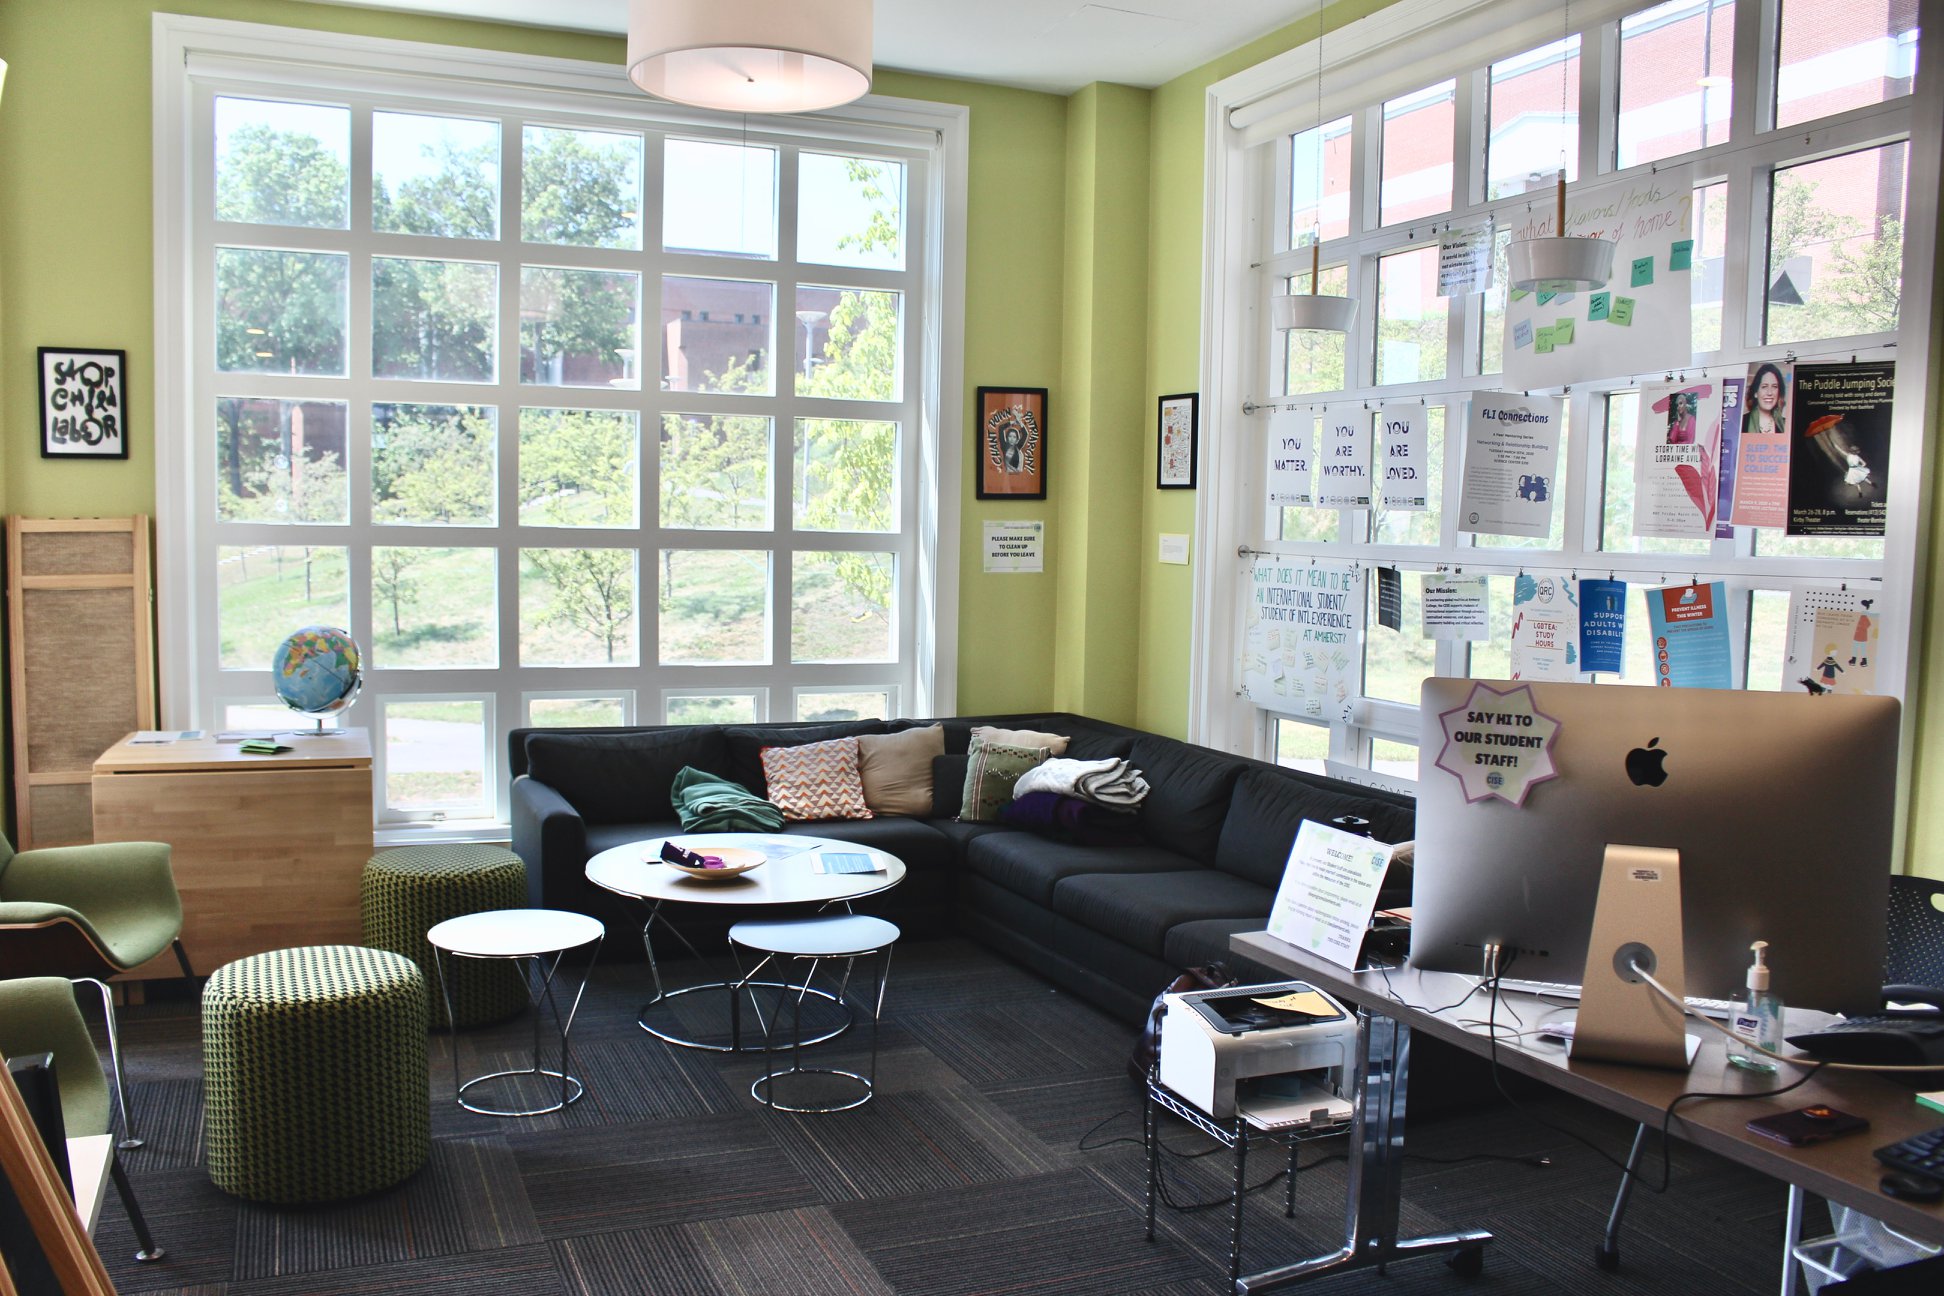 The CISE community space